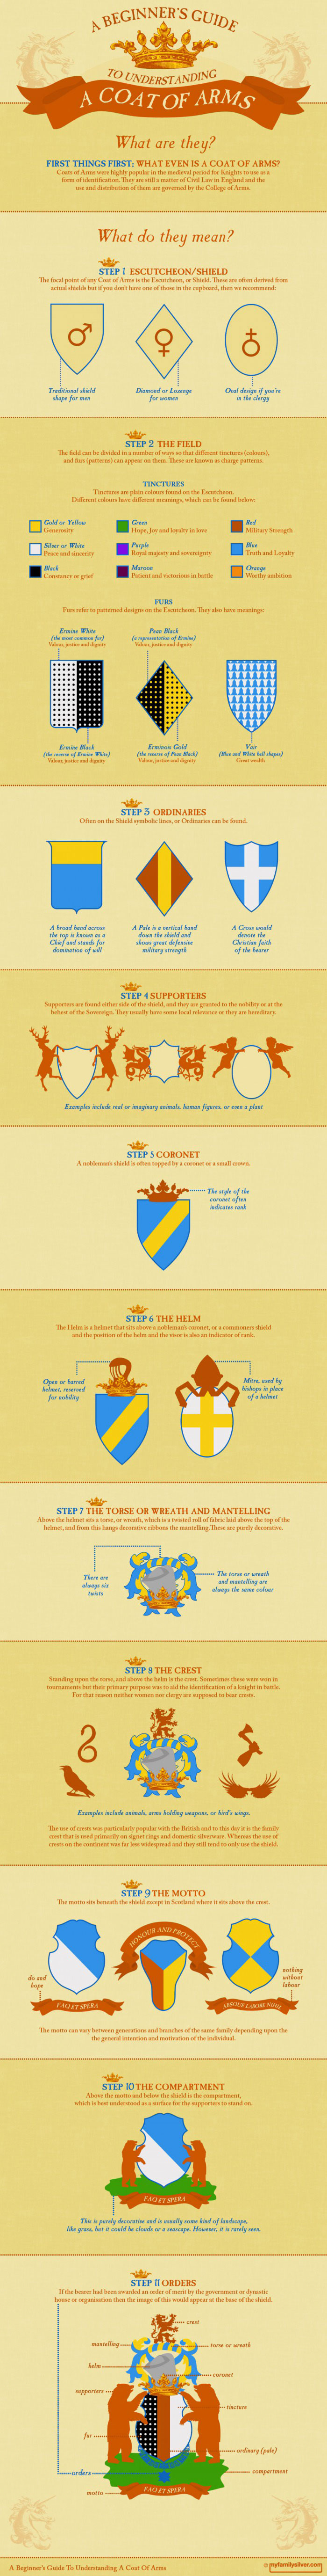 a beginner's guide to understanding a coat of arms